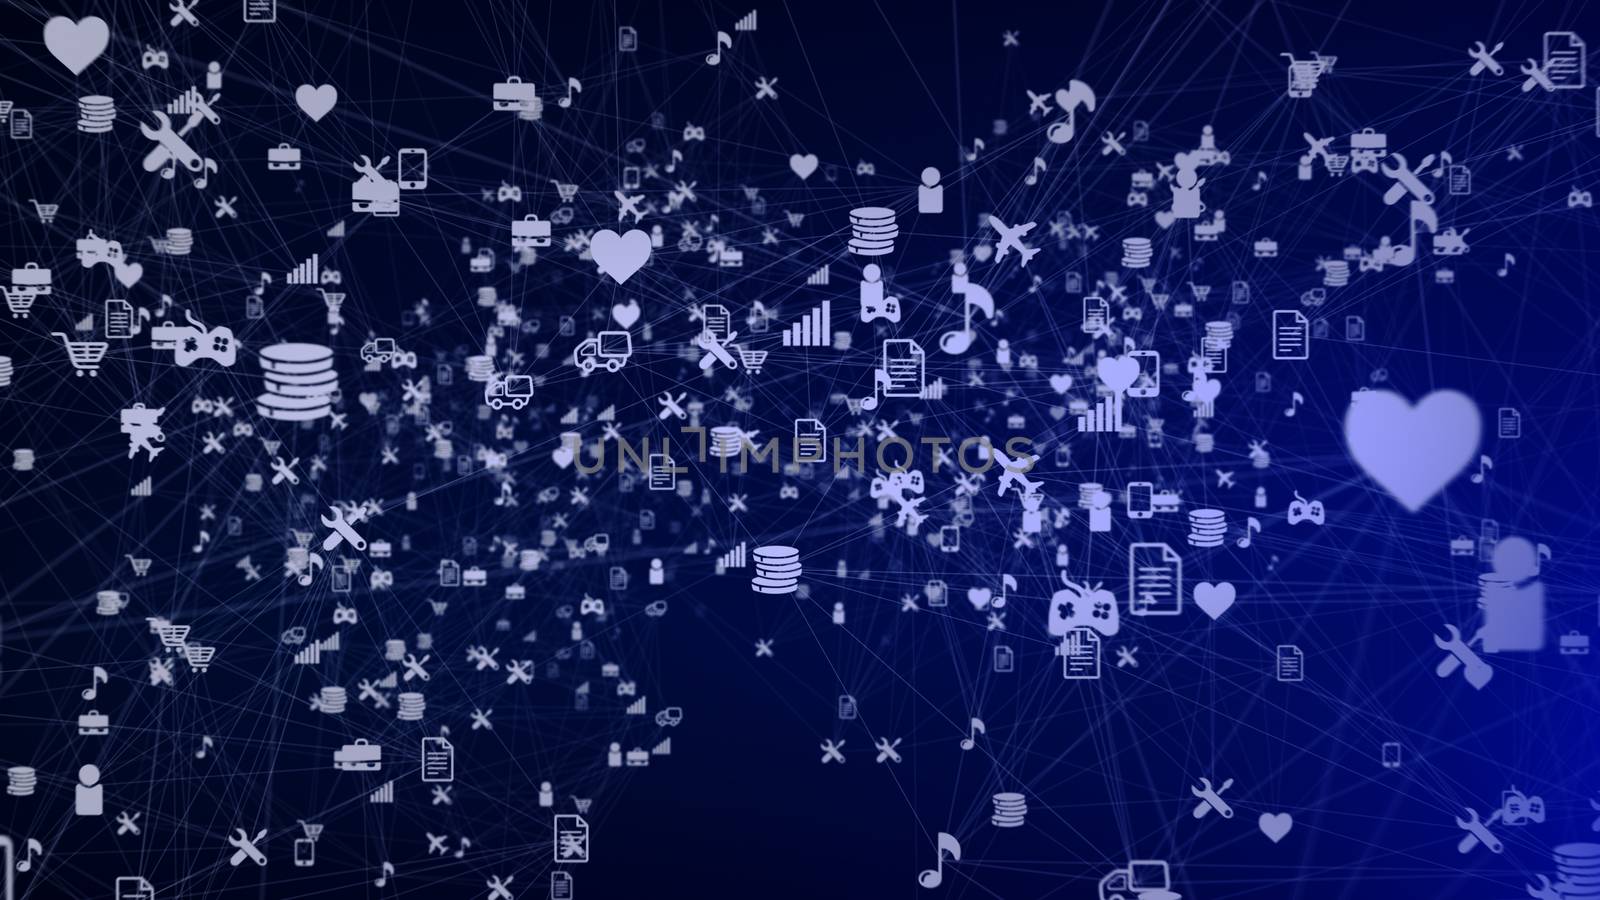 Cheerful 3d illustration of many social network symbols and signs including music, cargo, coins, charts, airplanes, hearts, in the dark blue backdrop.